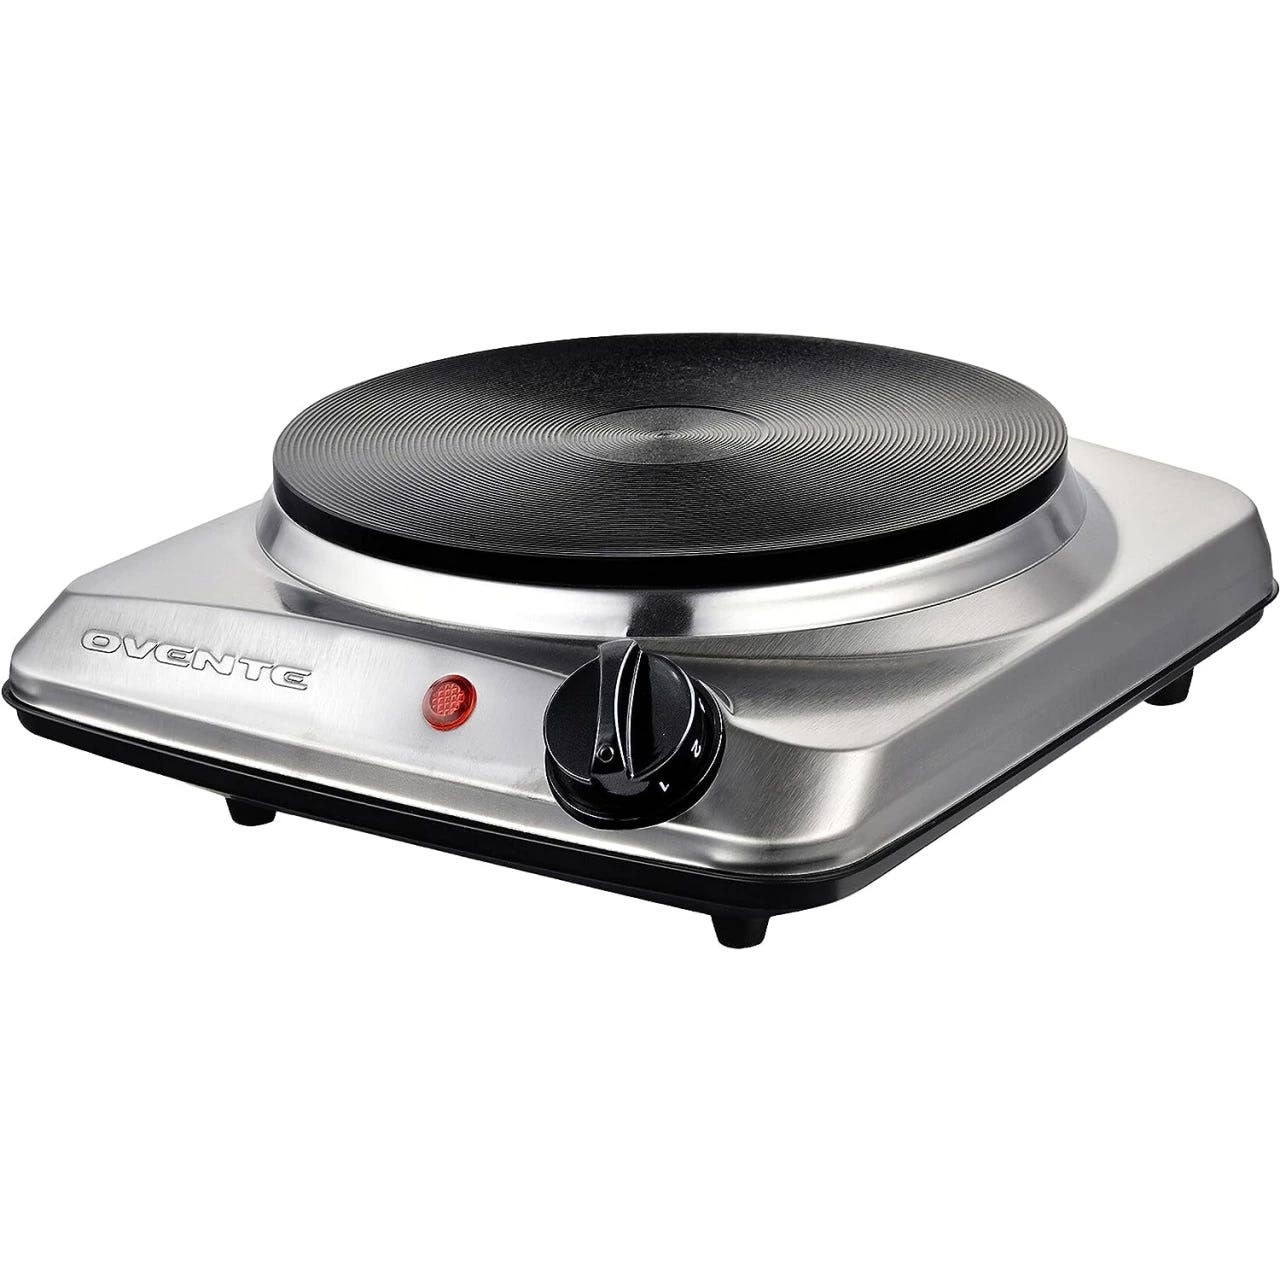 Techwood 7.5 Hot Plate Portable Electric Stove for Cooking,1500W